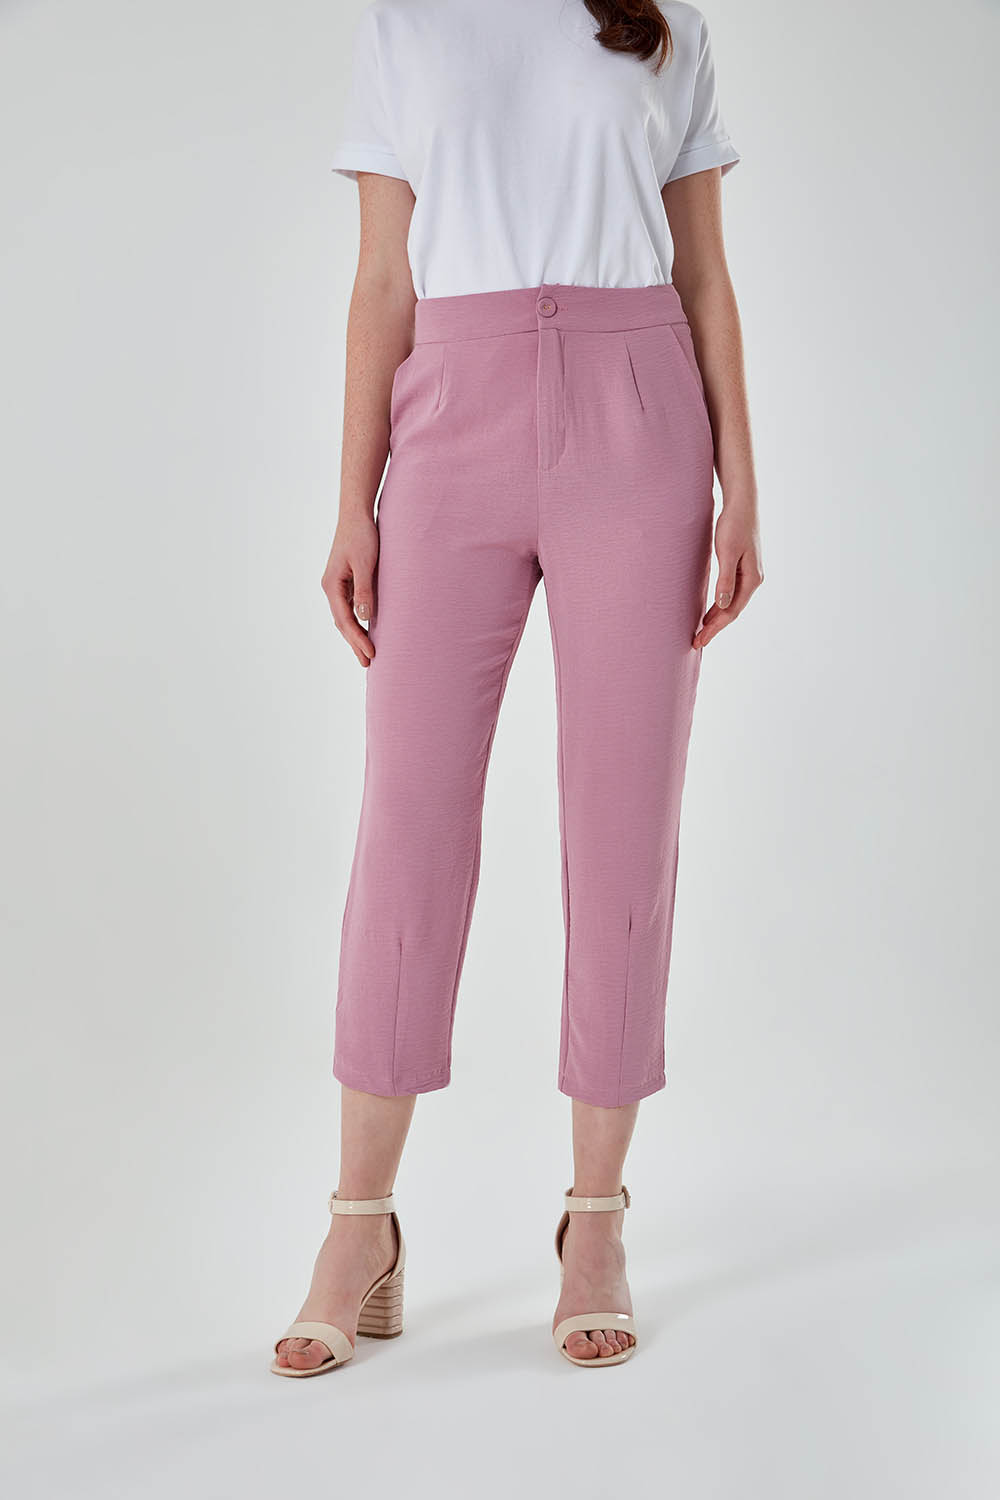 Hem Stitched Dusty Rose Carrot Trousers